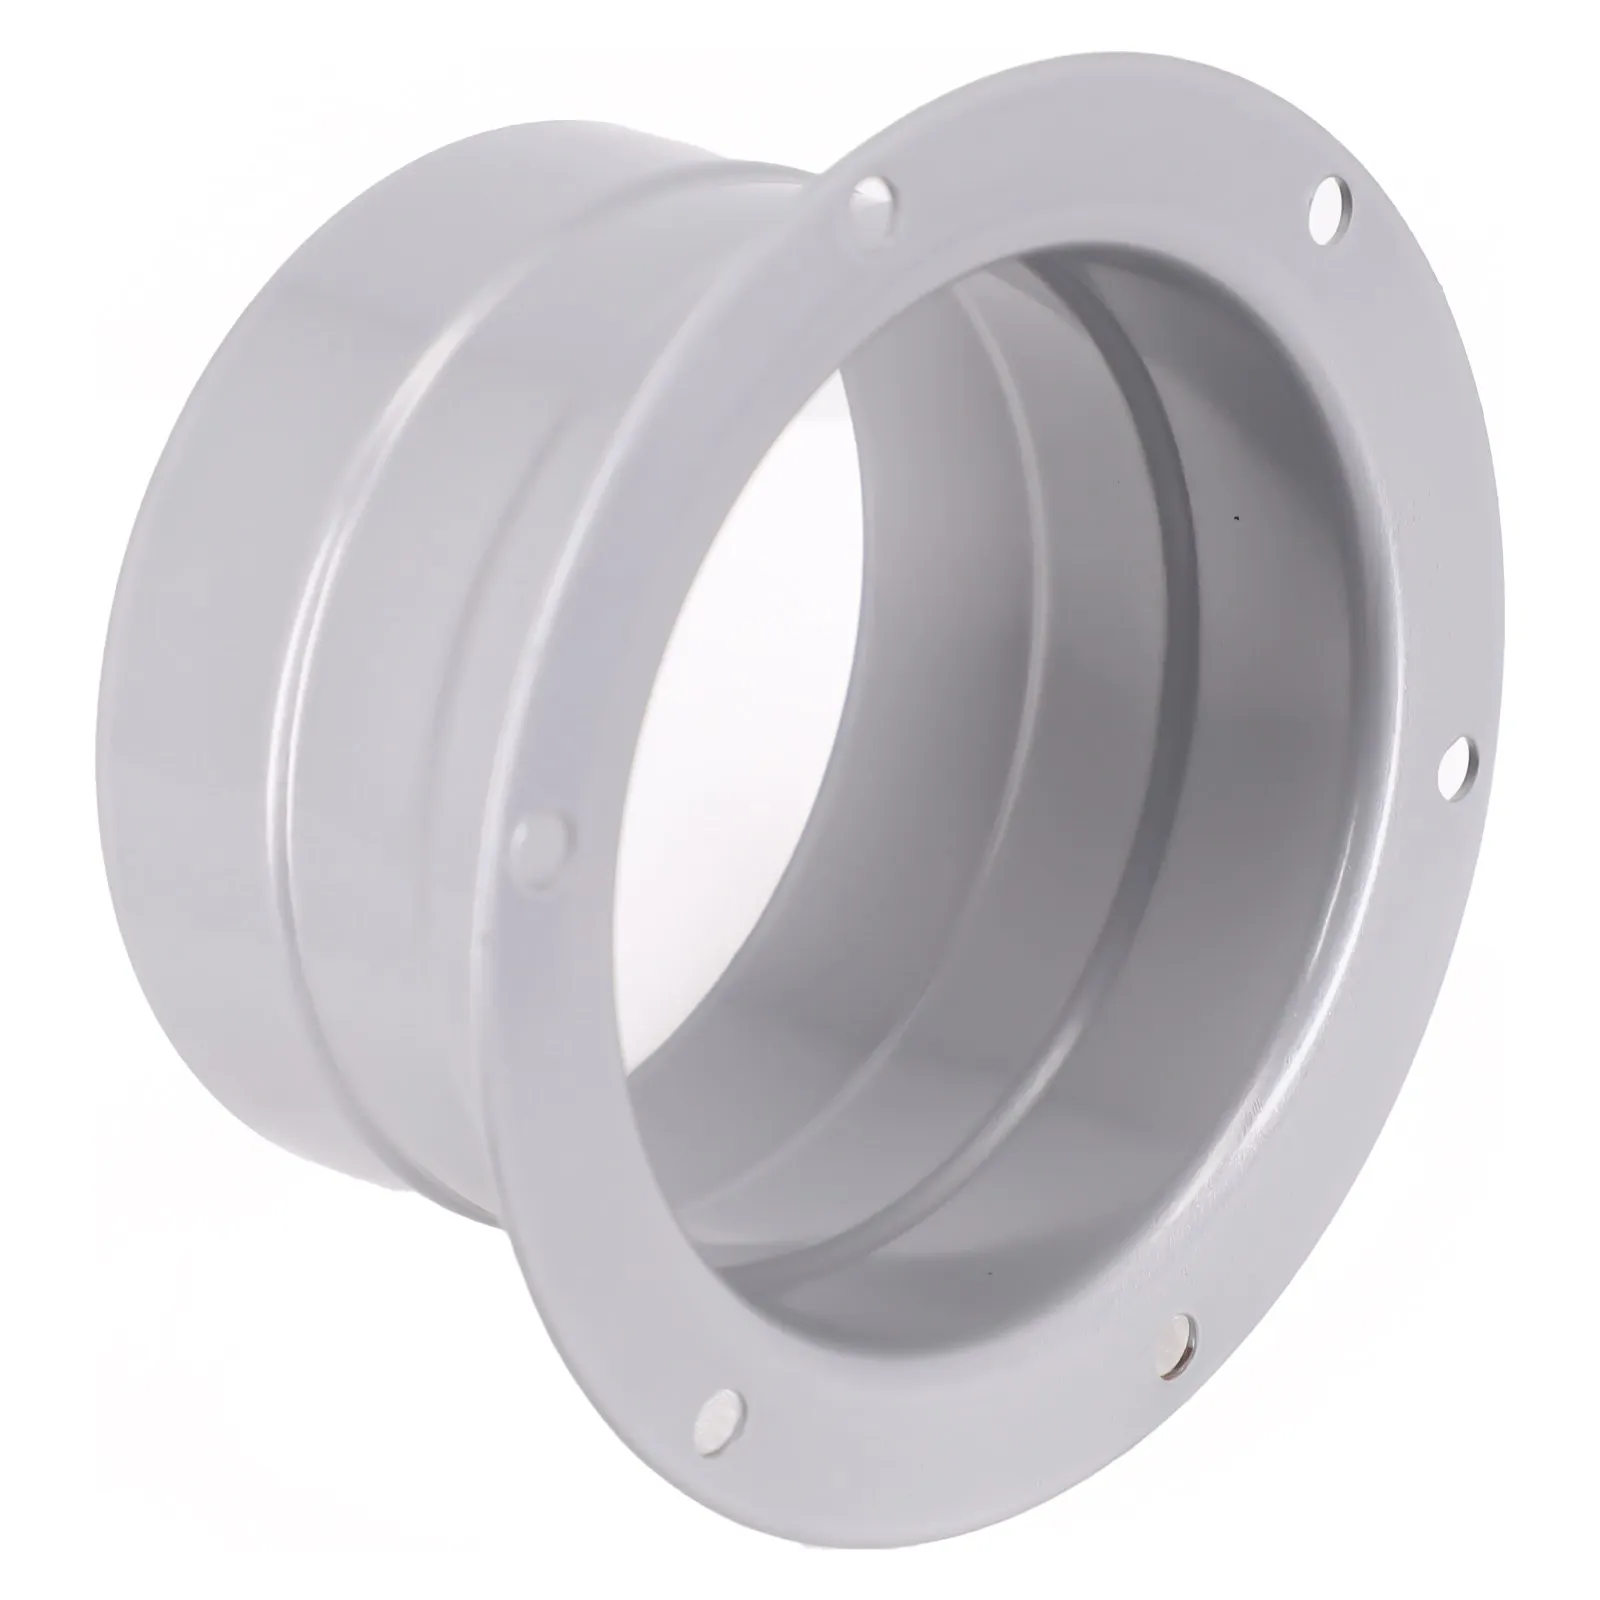 

Adapter Flange Connection Flange Flange Adapter Gray Metal Vent Pipe Wall 100mm 120mm 150mm 1pcs 200mm Brand New